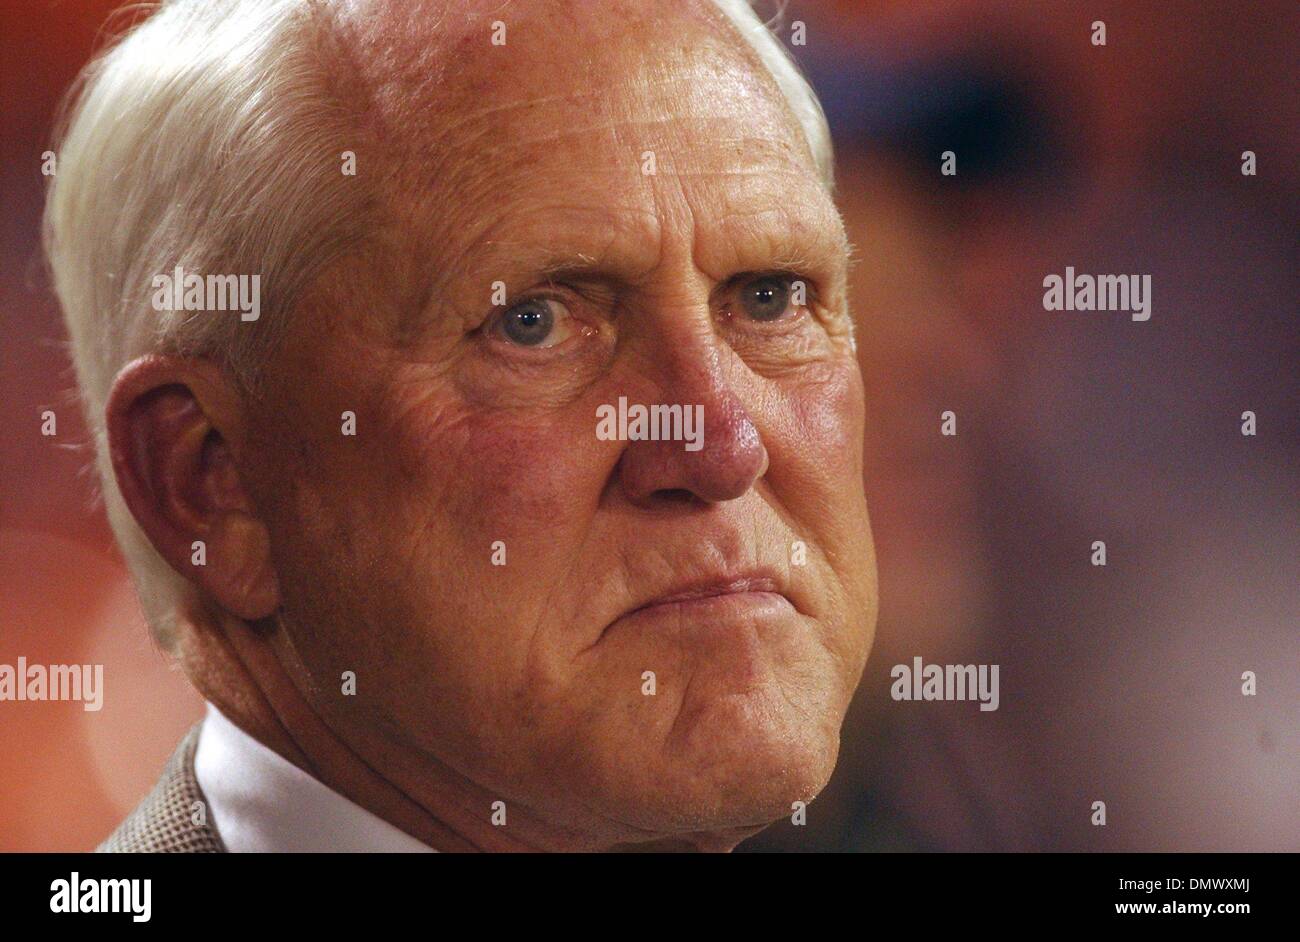 Nov 25, 2002 - San Francisco, California, USA - BILL WALSH, the inventor of the West Coast Offense, was one of the greatest football coaches of all time. Walsh, guided the San Francisco 49ers to three championships and six NFC West division titles in his 10 years as head coach, has died at the age of 75, following a long battle with leukemia. PICTURED: Bill Walsh has a dour face wa Stock Photo